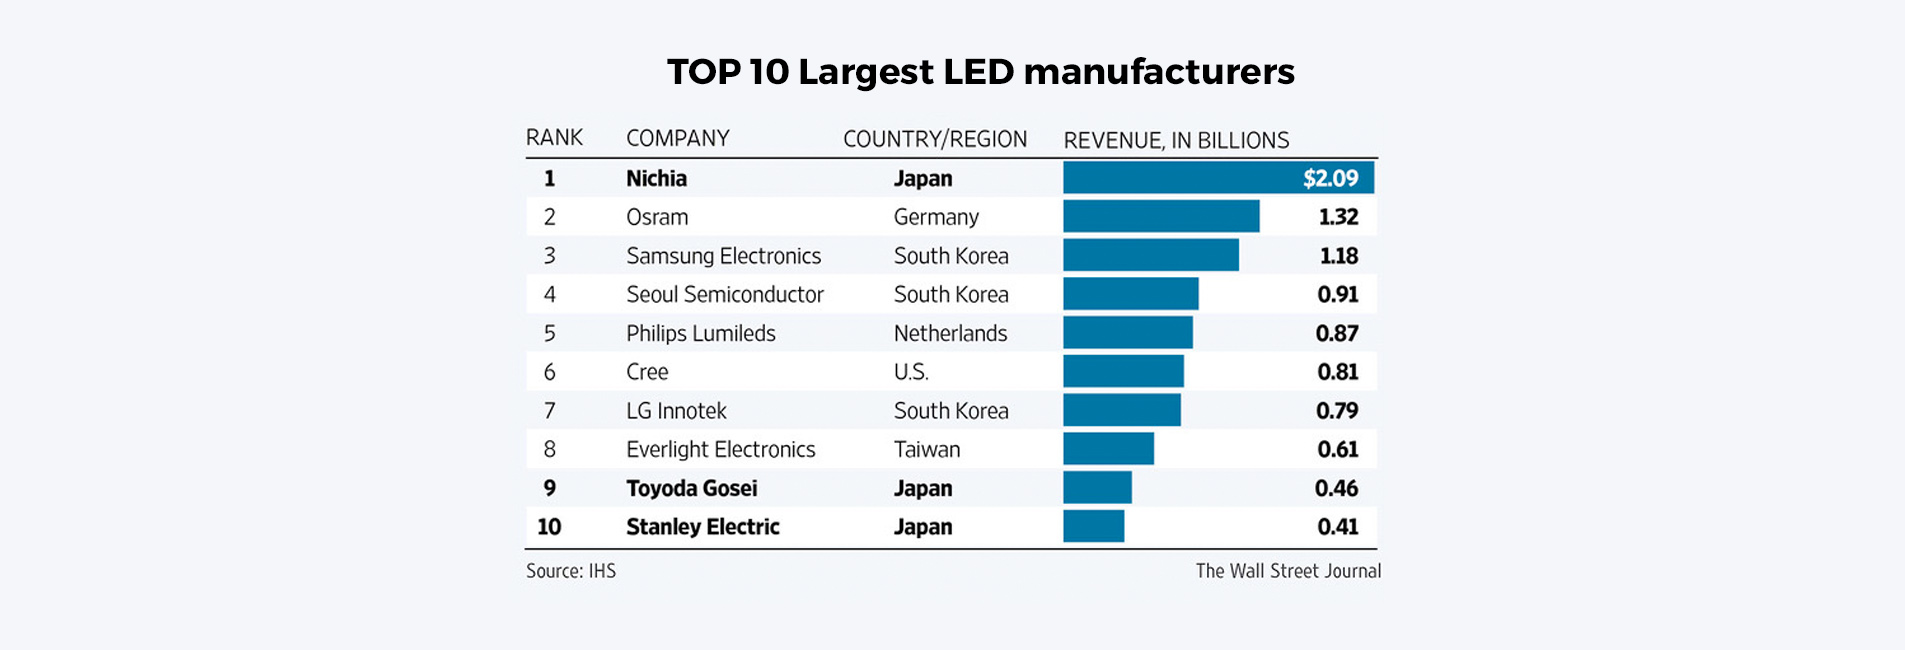 Top 10 LED manufacturers globally